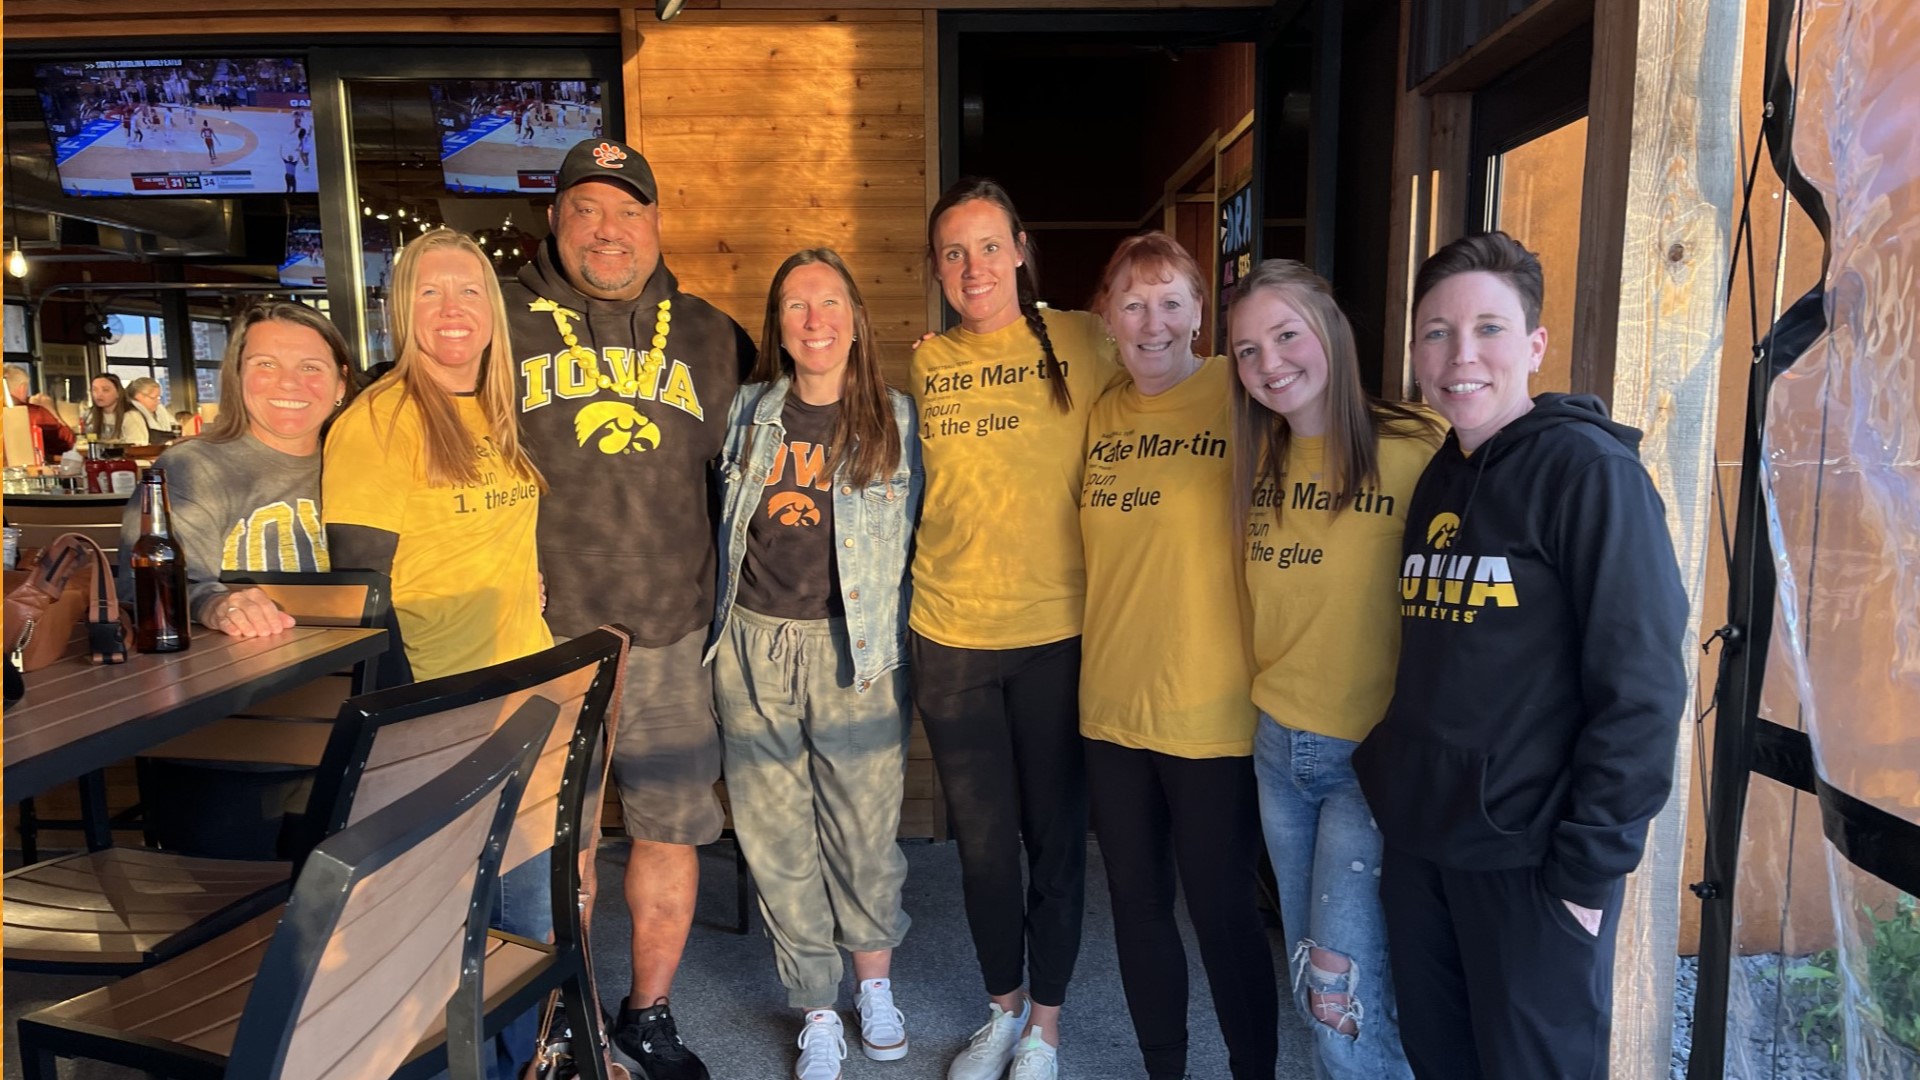 A historic Iowa women's basketball team barely beat rival UConn to make it to the March Madness championship game Sunday. Iowa pulled out a nail-biting 71-69 win.